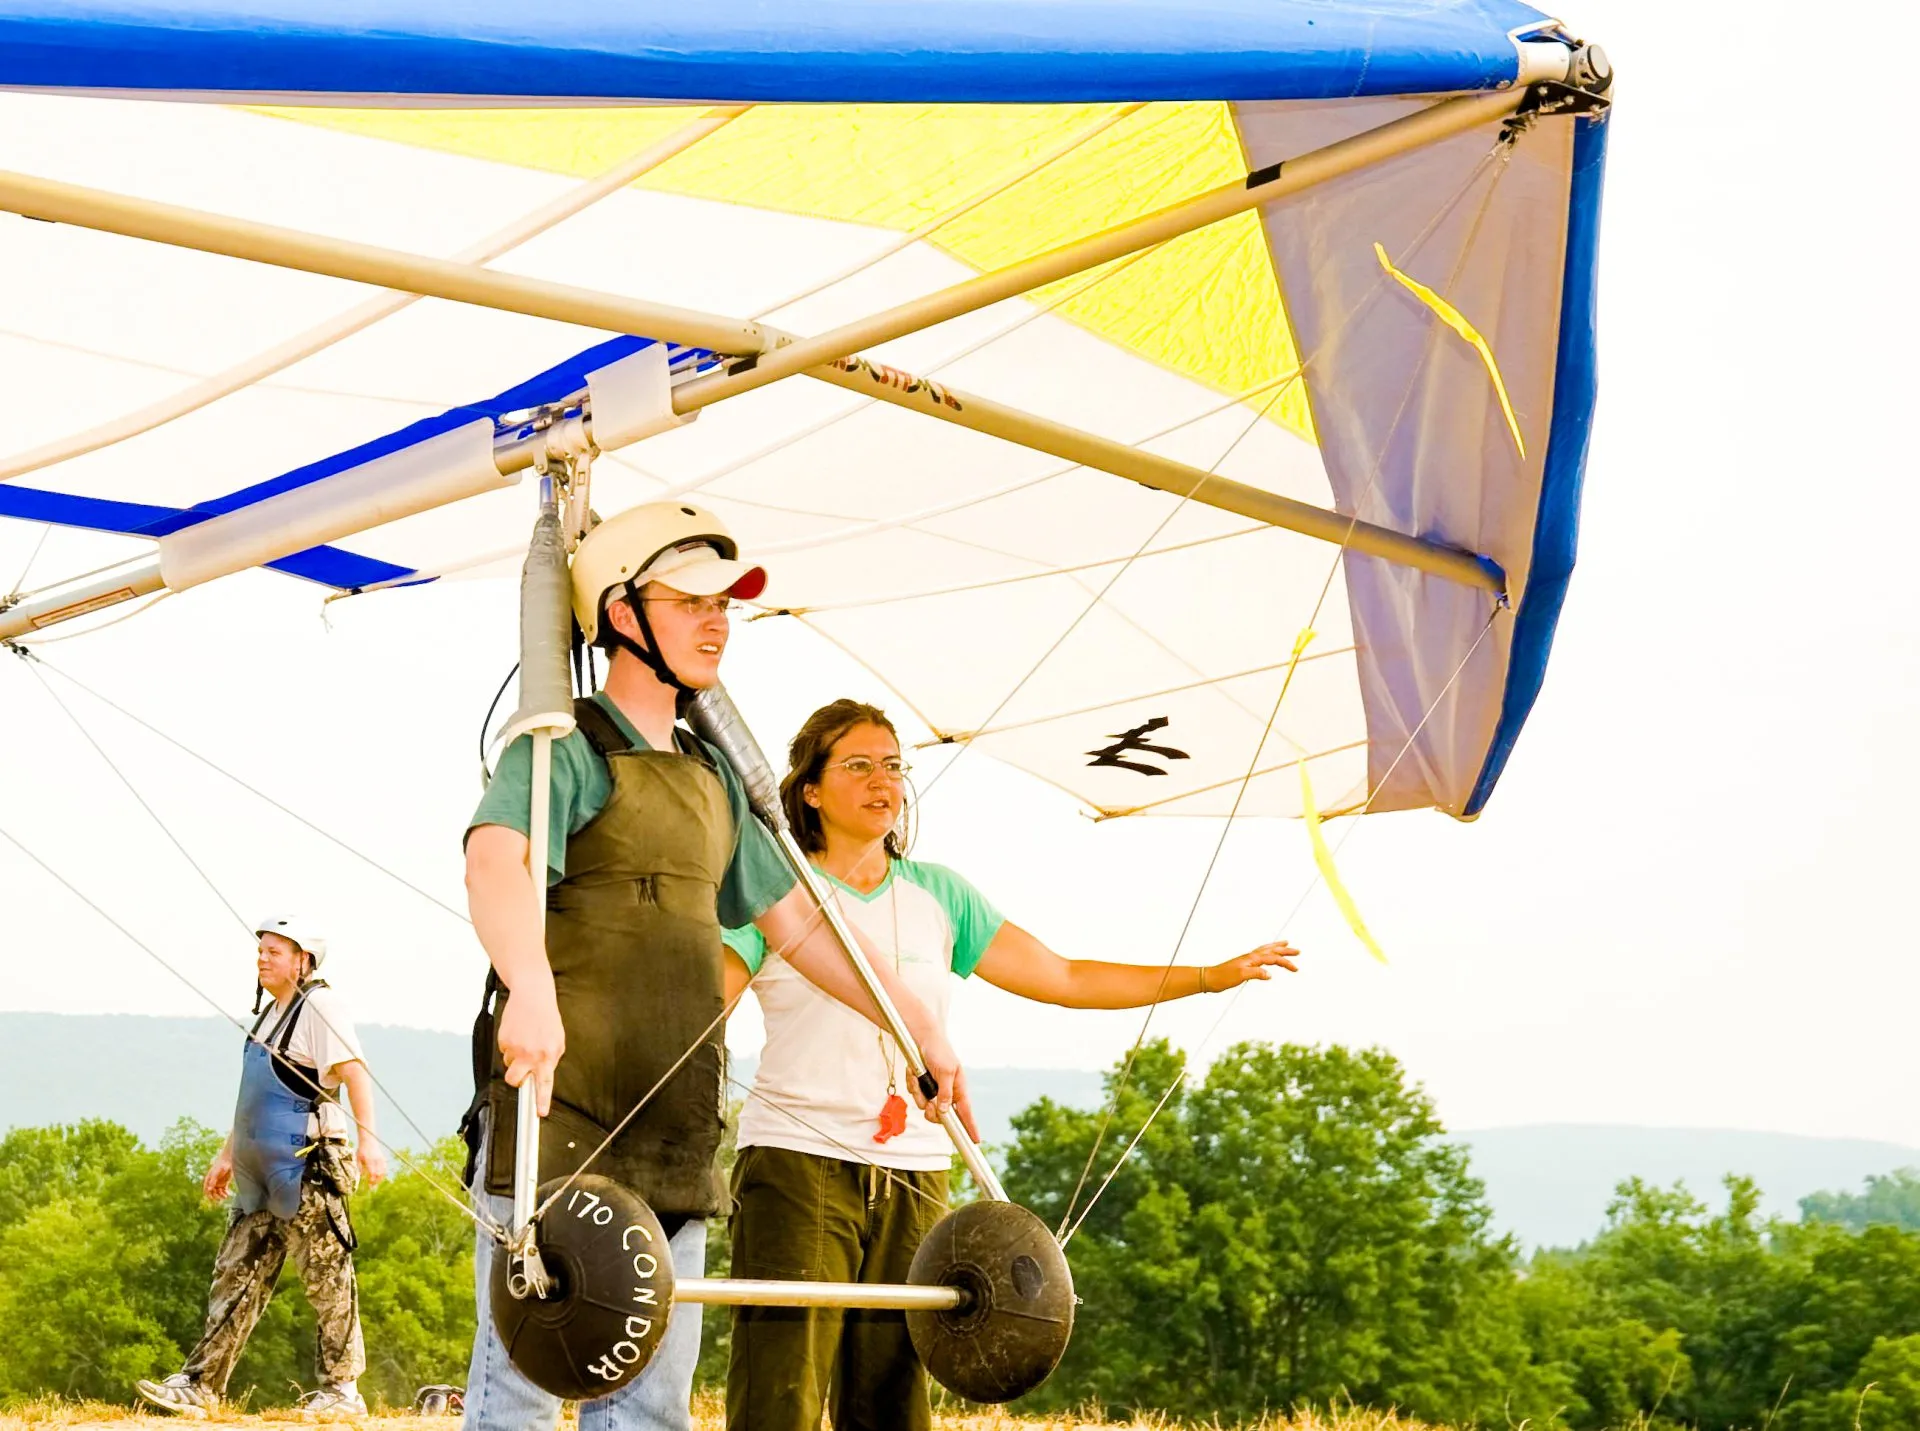 Book your flight today – Lookout Mountain Flight Park